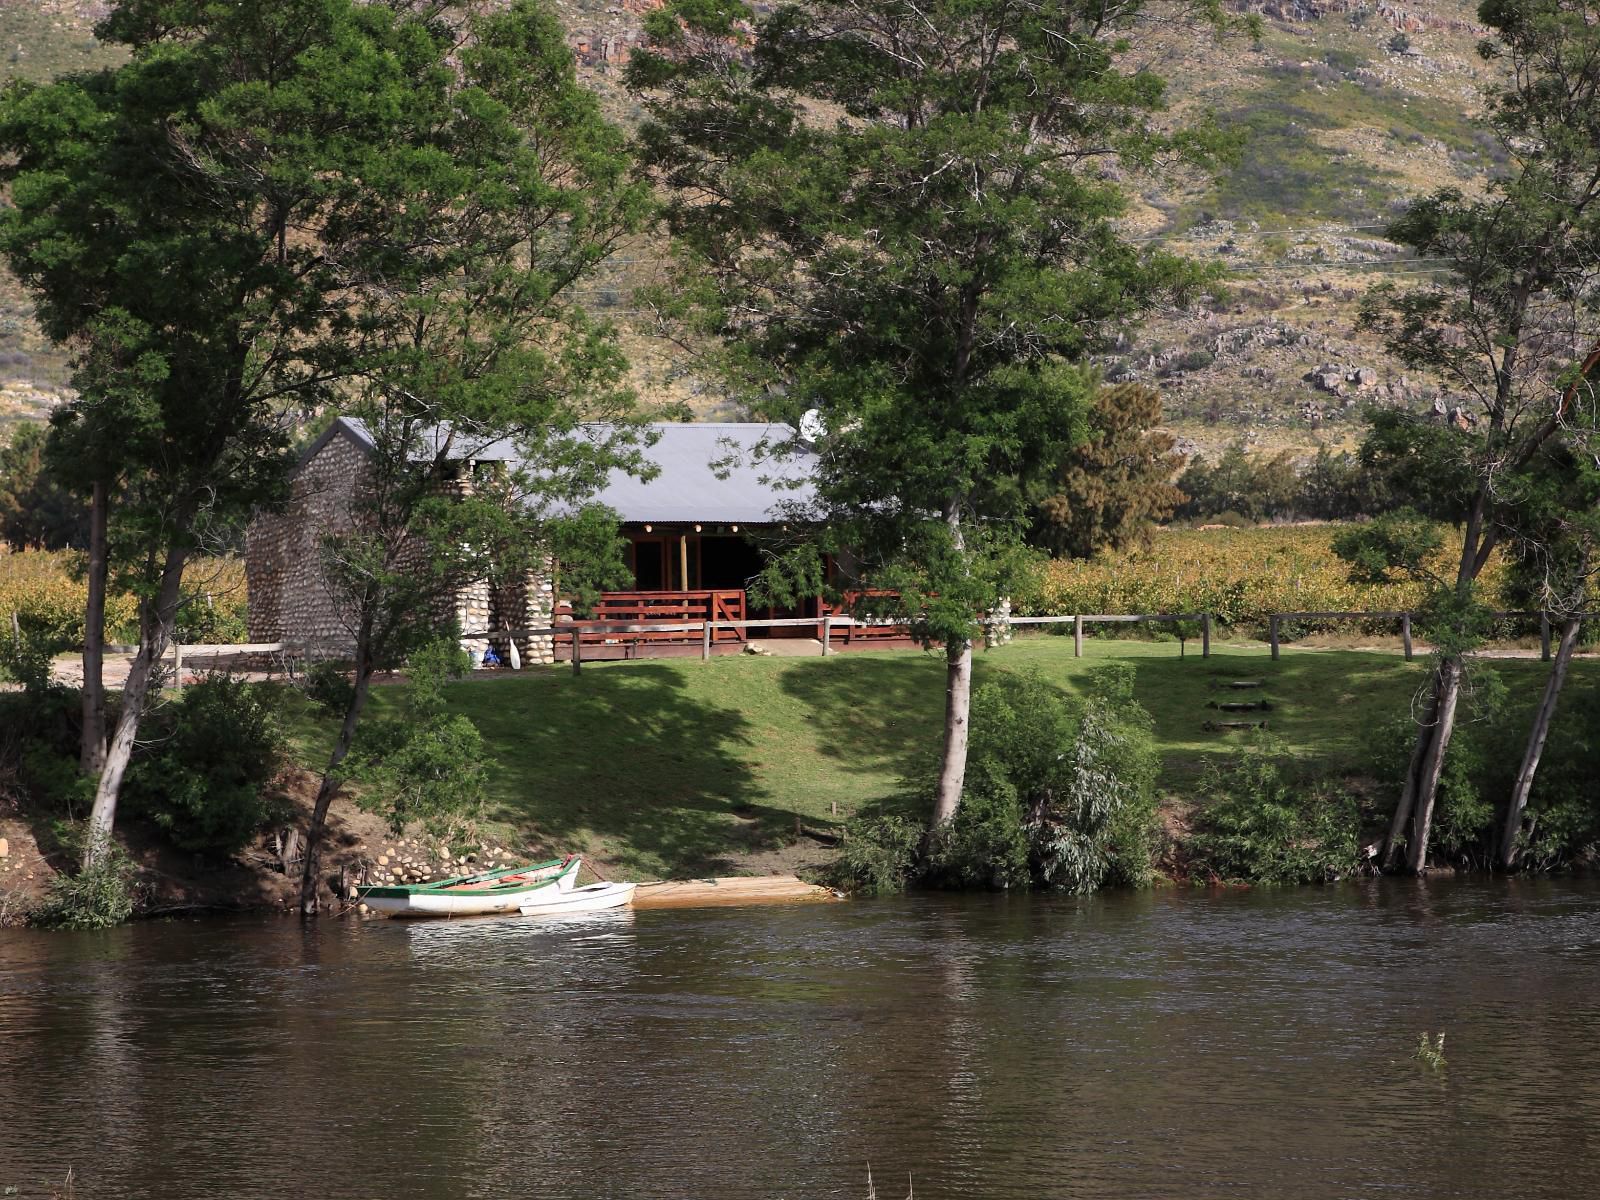 River Edge Accommodation Bainskloof Western Cape South Africa Boat, Vehicle, Bridge, Architecture, Canoe, River, Nature, Waters